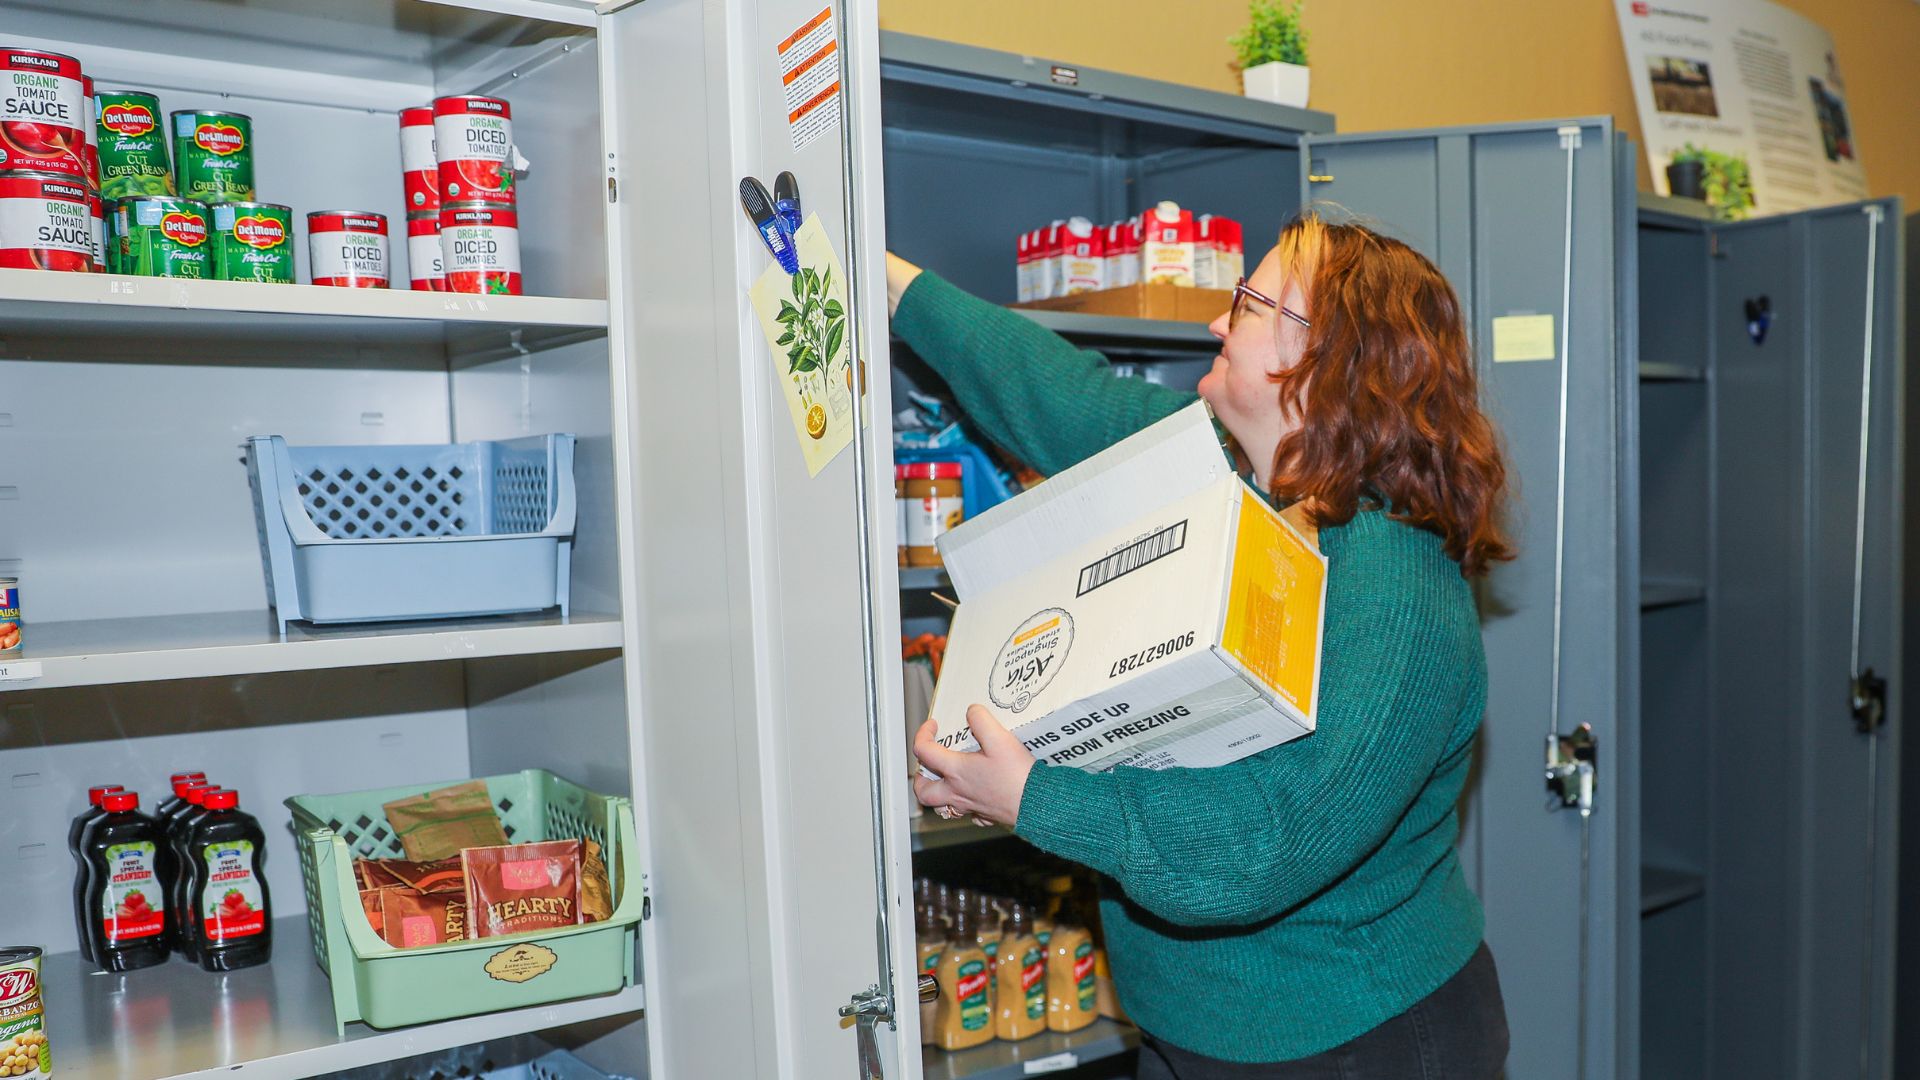 Basic Needs coordinator Robyn DoCanto stocks shelves in the pantry, which provides food-insecure students with important nutrition.